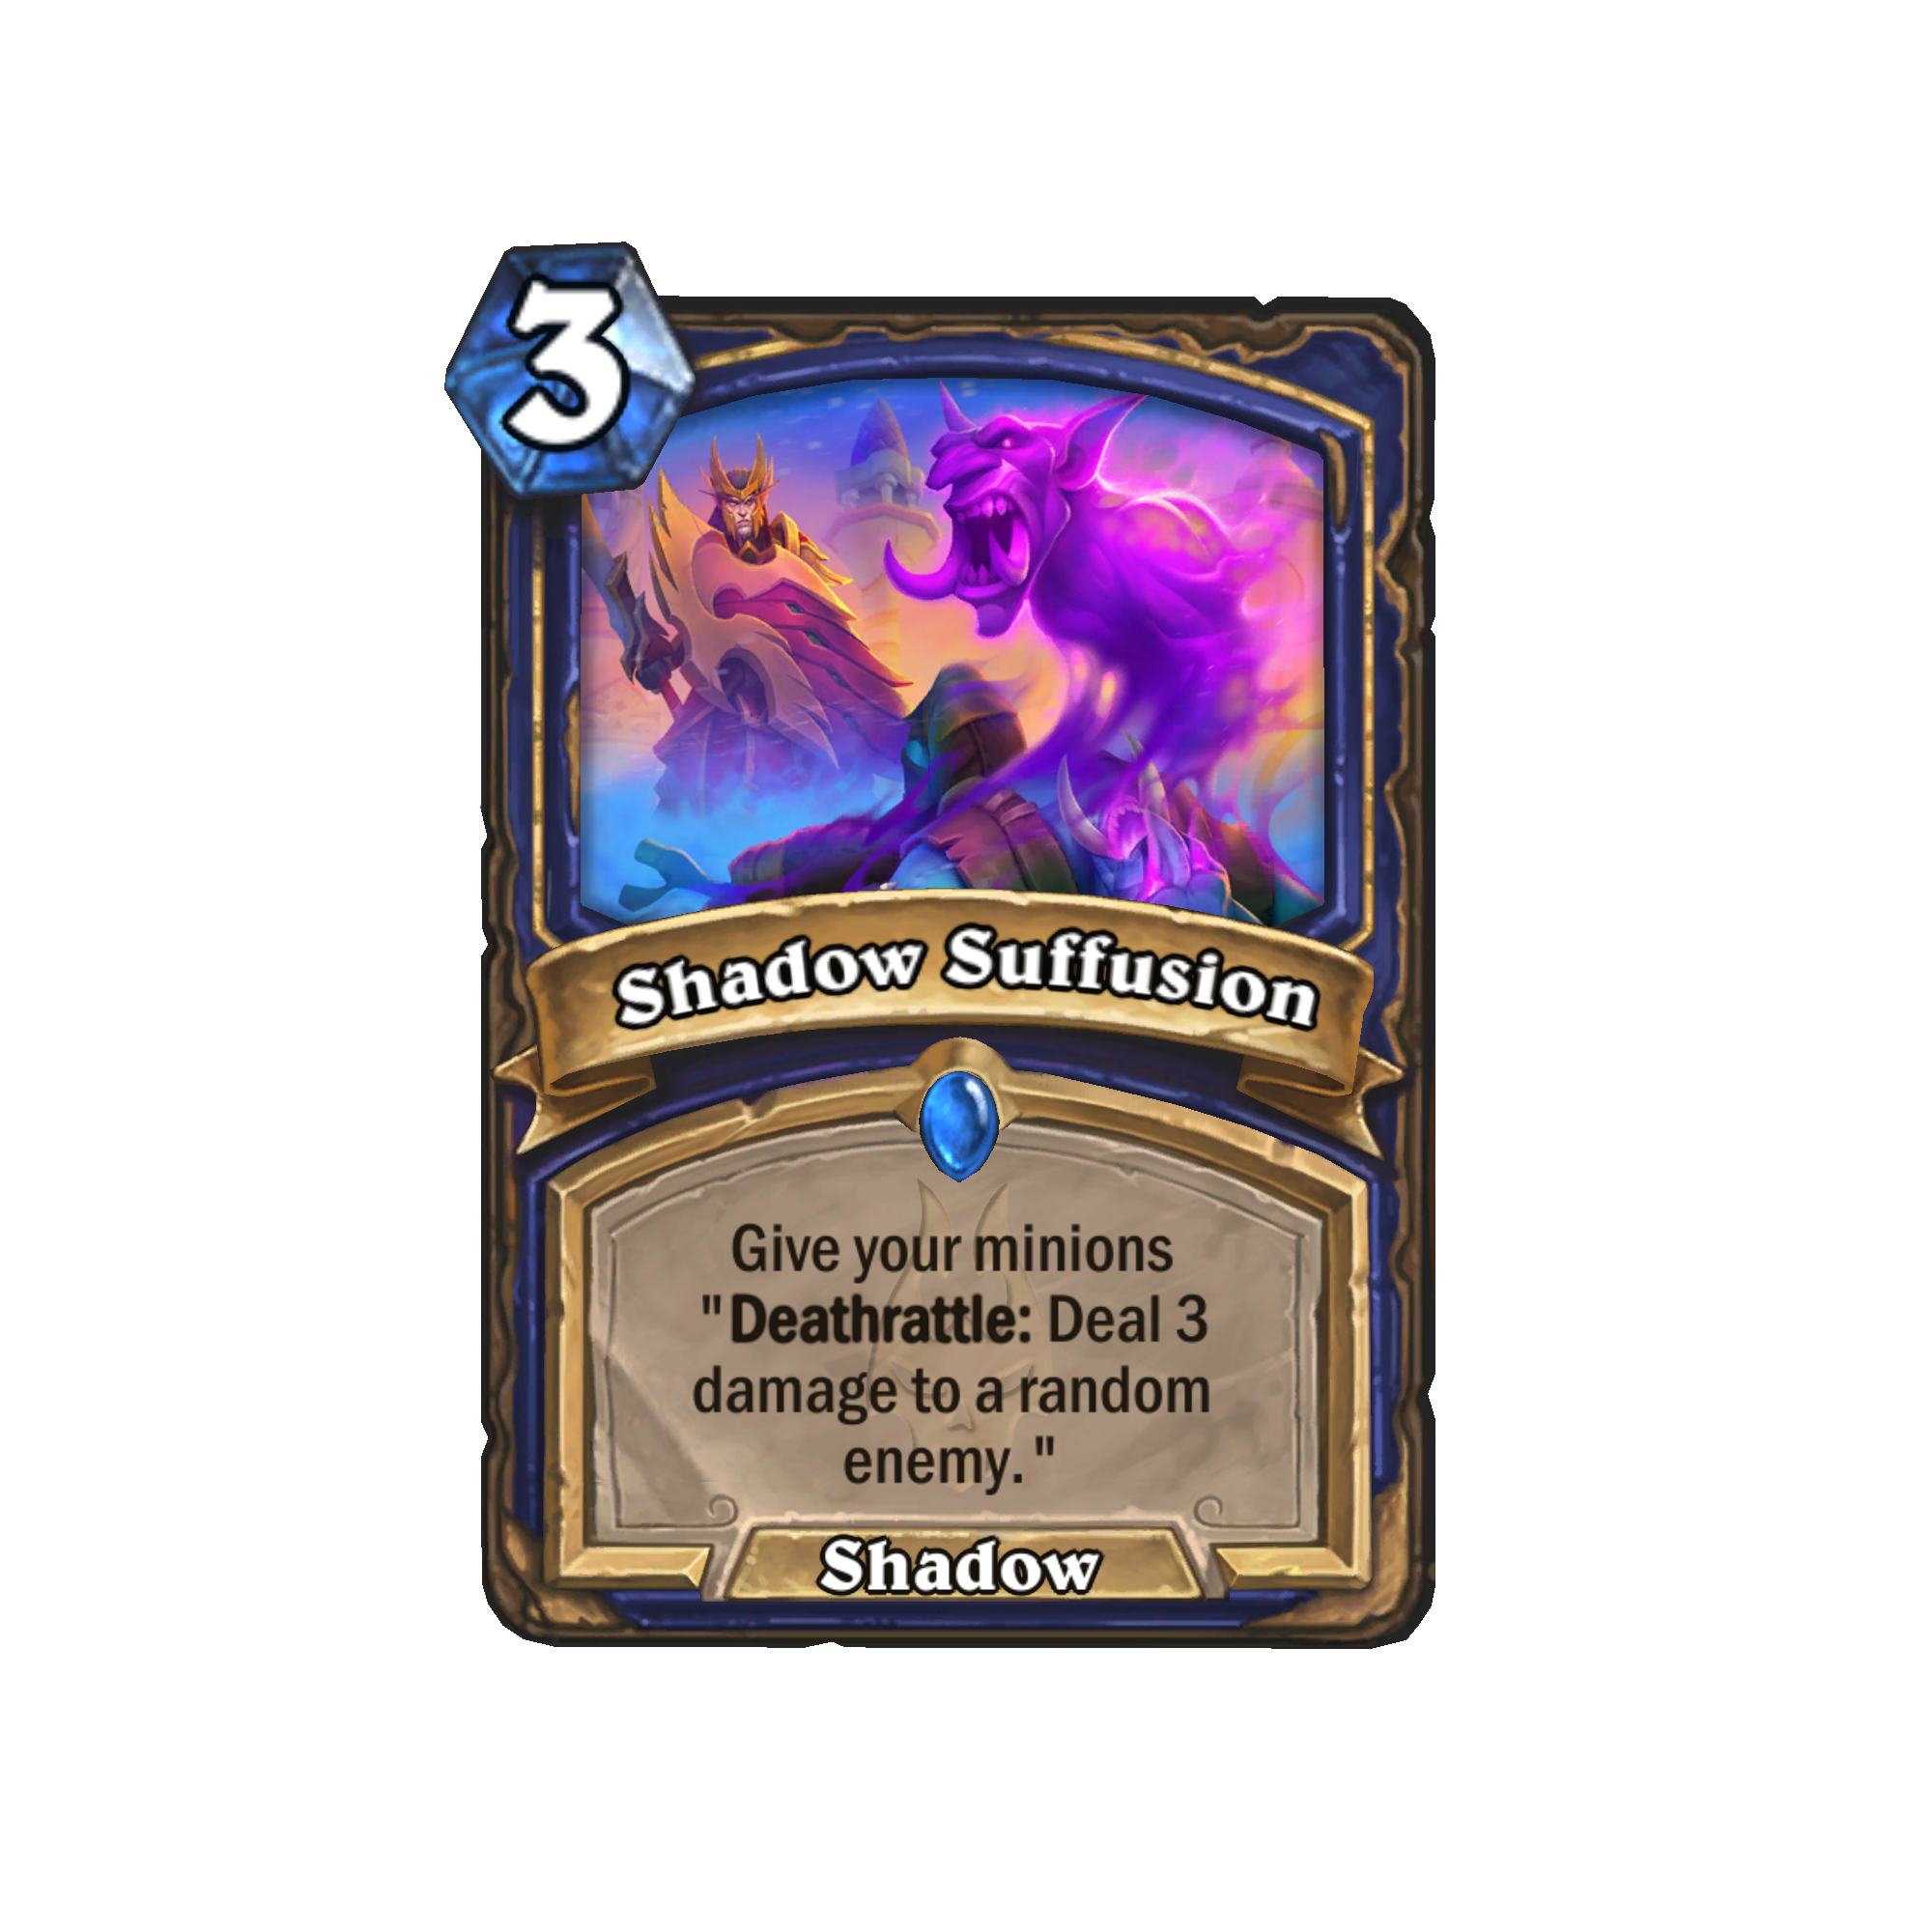 Silver Hand Paladin gets new cards. New archetype for Shaman?